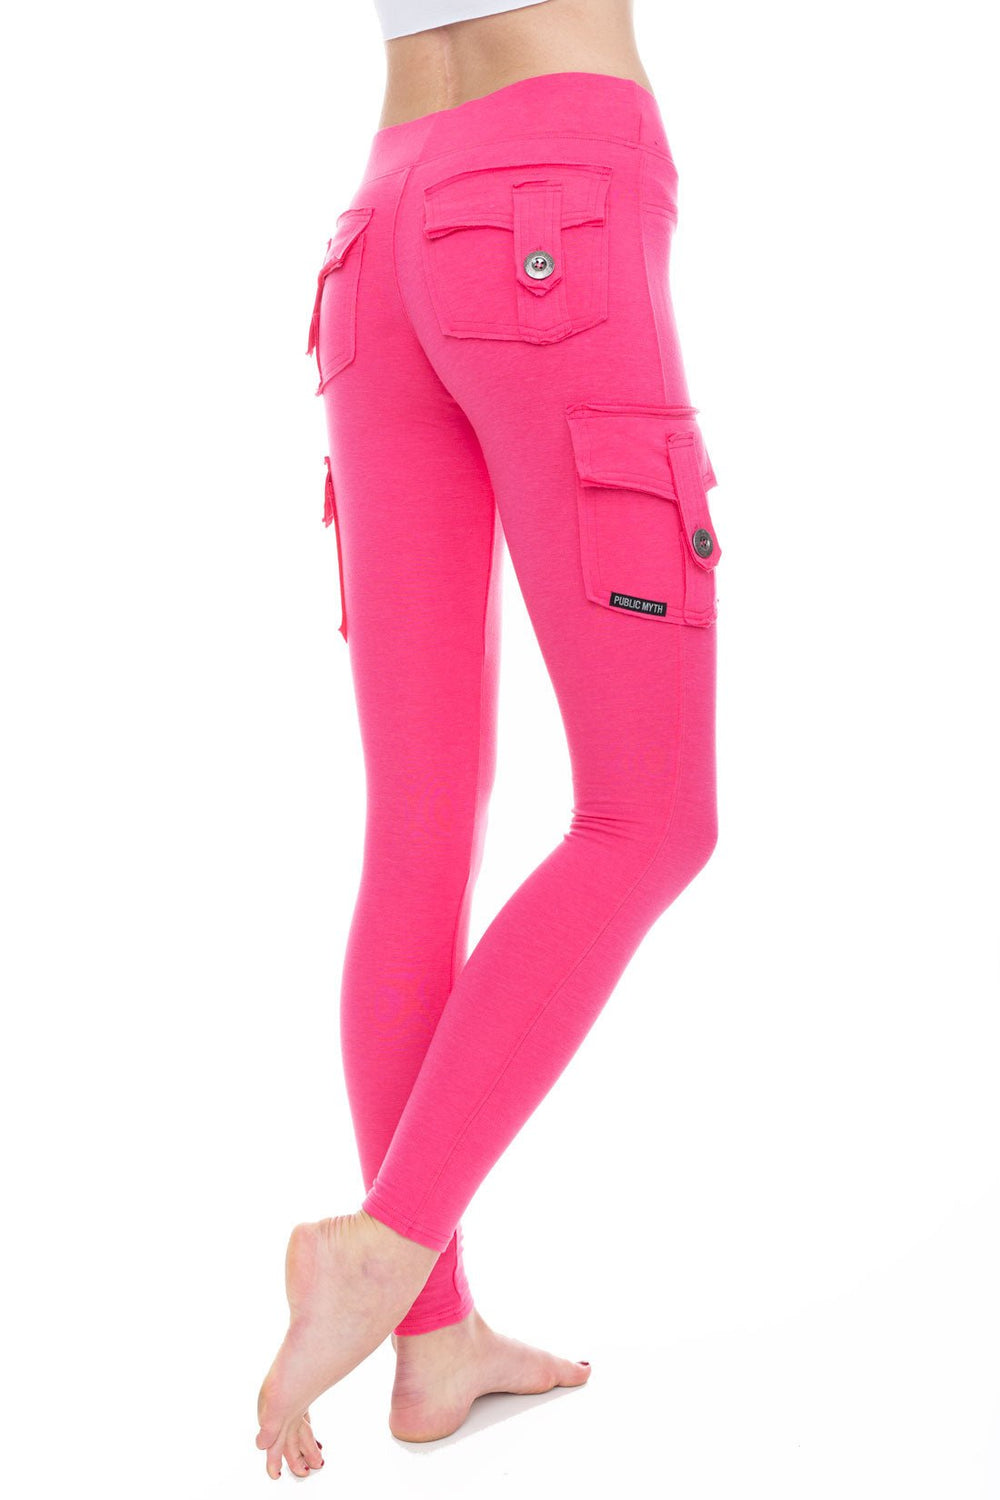 hot pink pocket leggings with back pockets and side pockets made from Tencel Lyocell and organic cotton